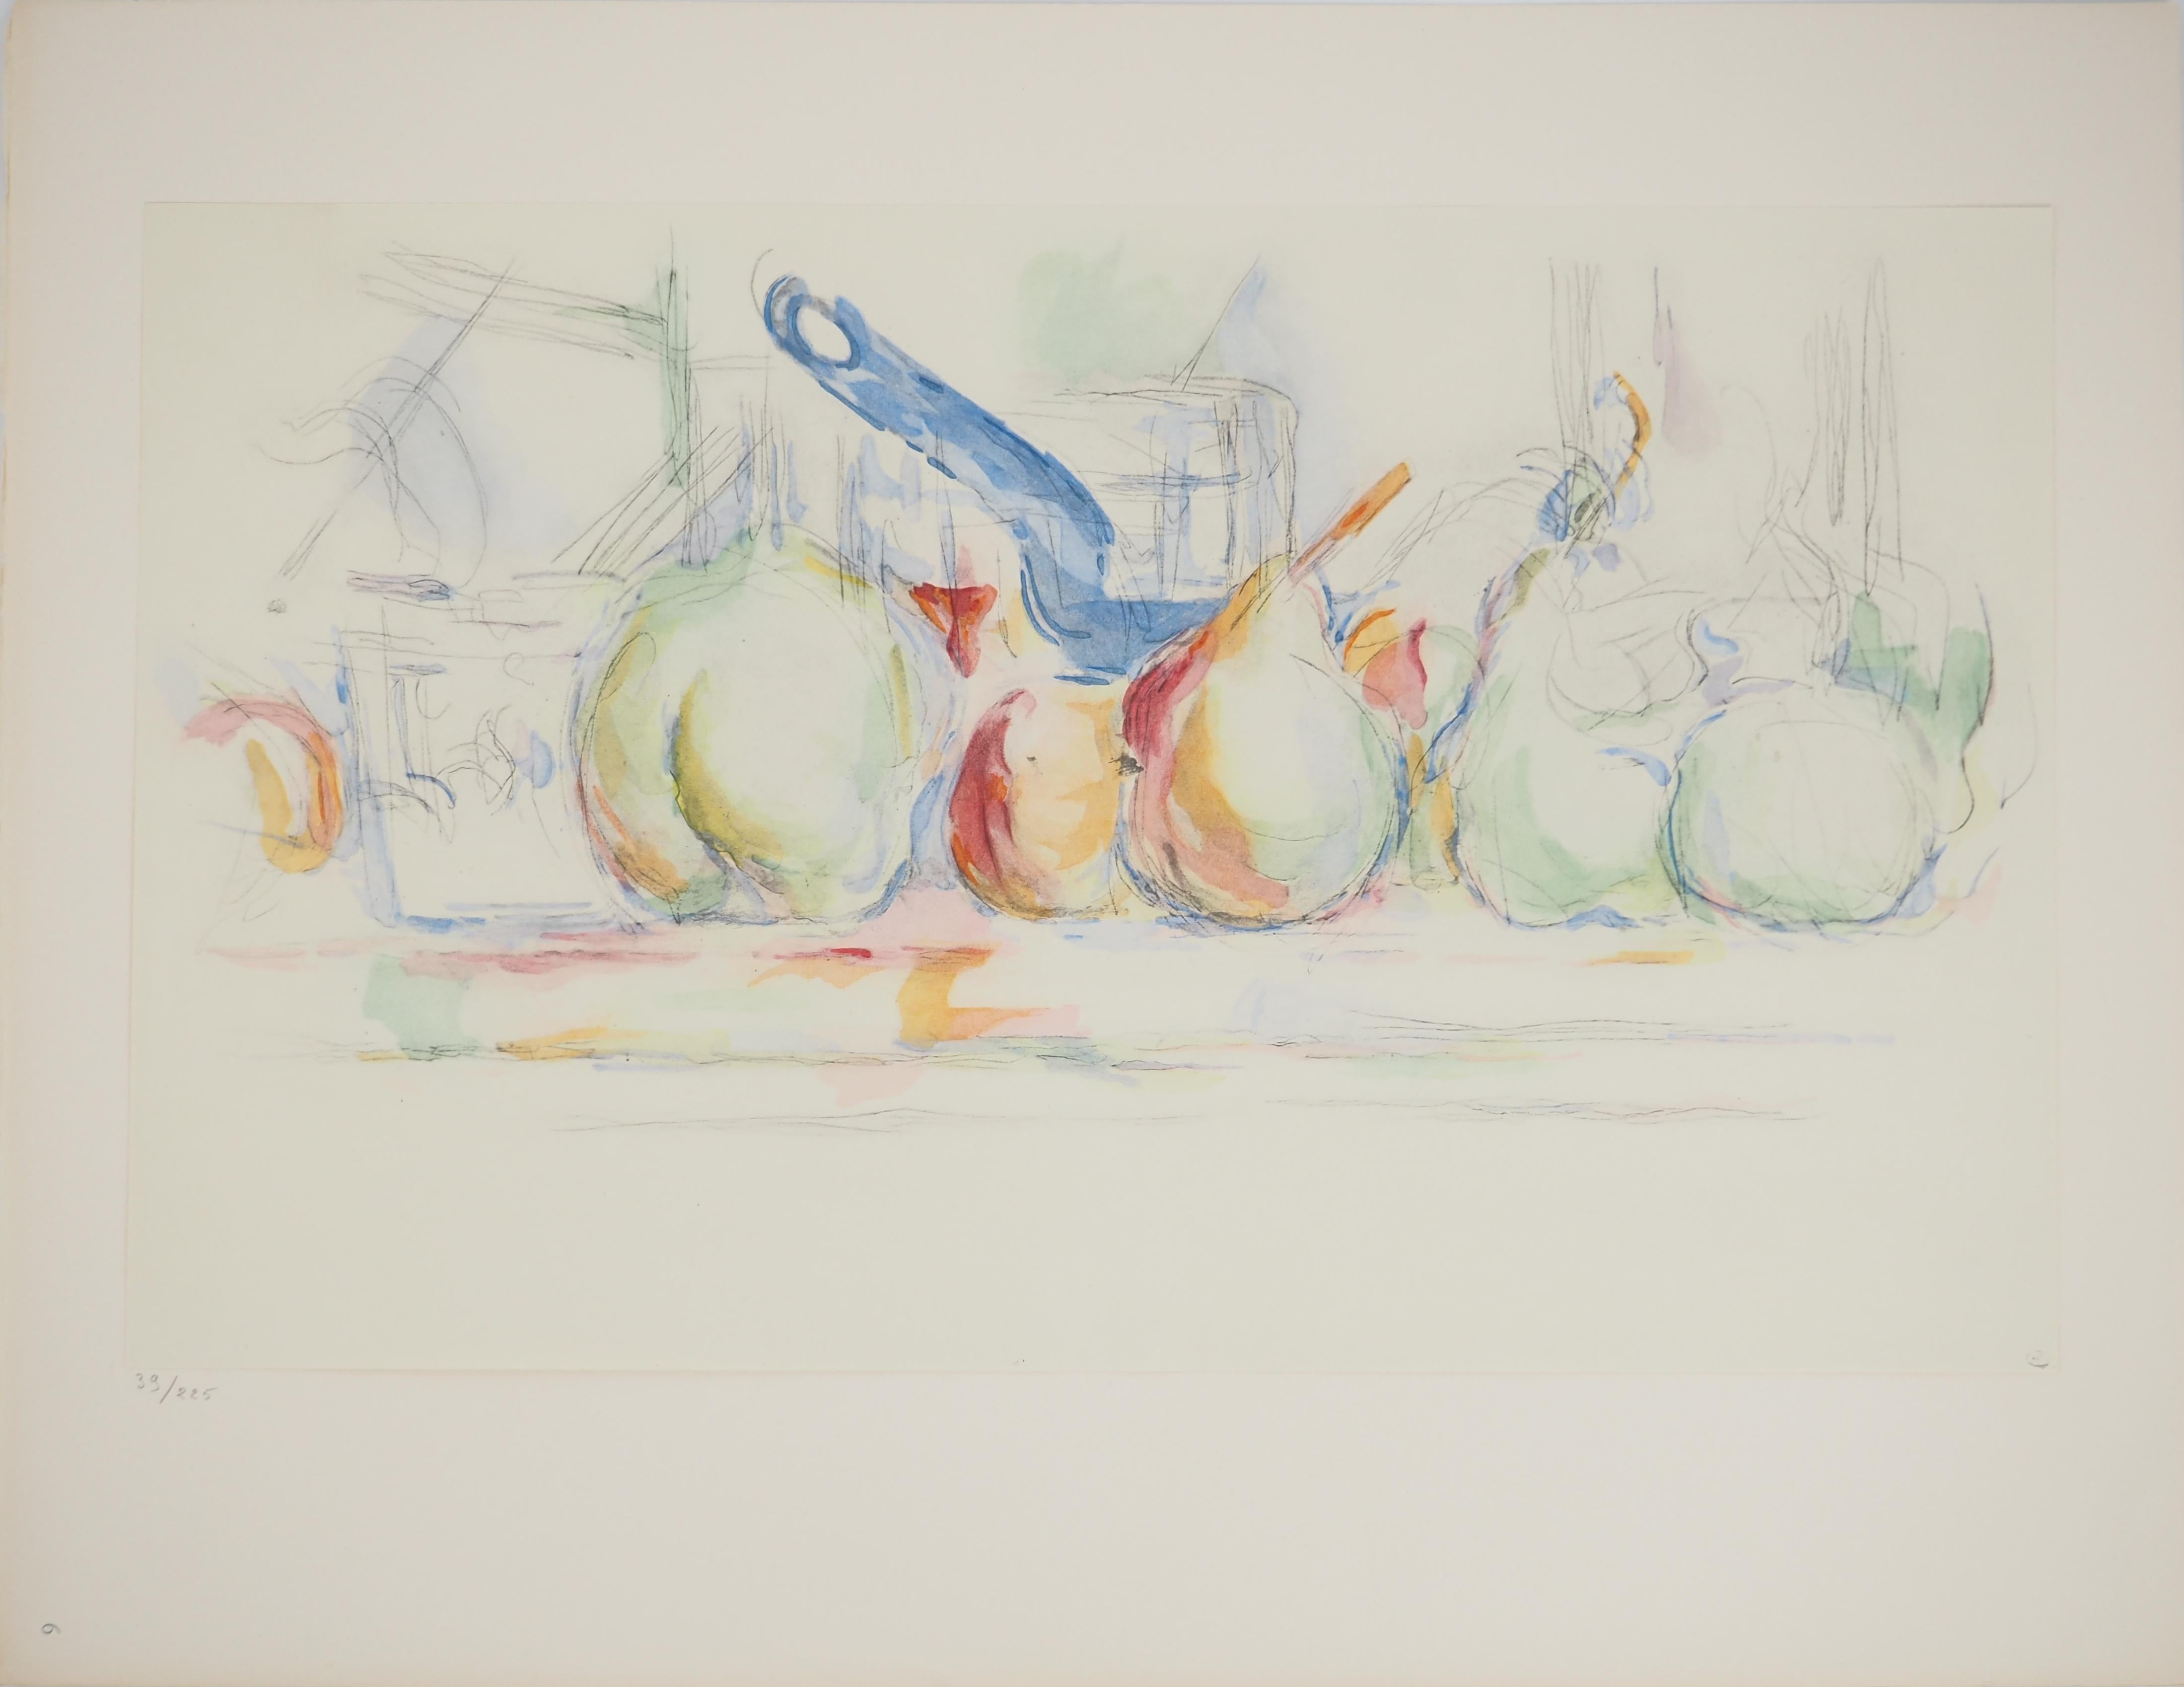 Still life - Fruits, pears and apples - Lithograph, 1971 - Print by Paul Cézanne